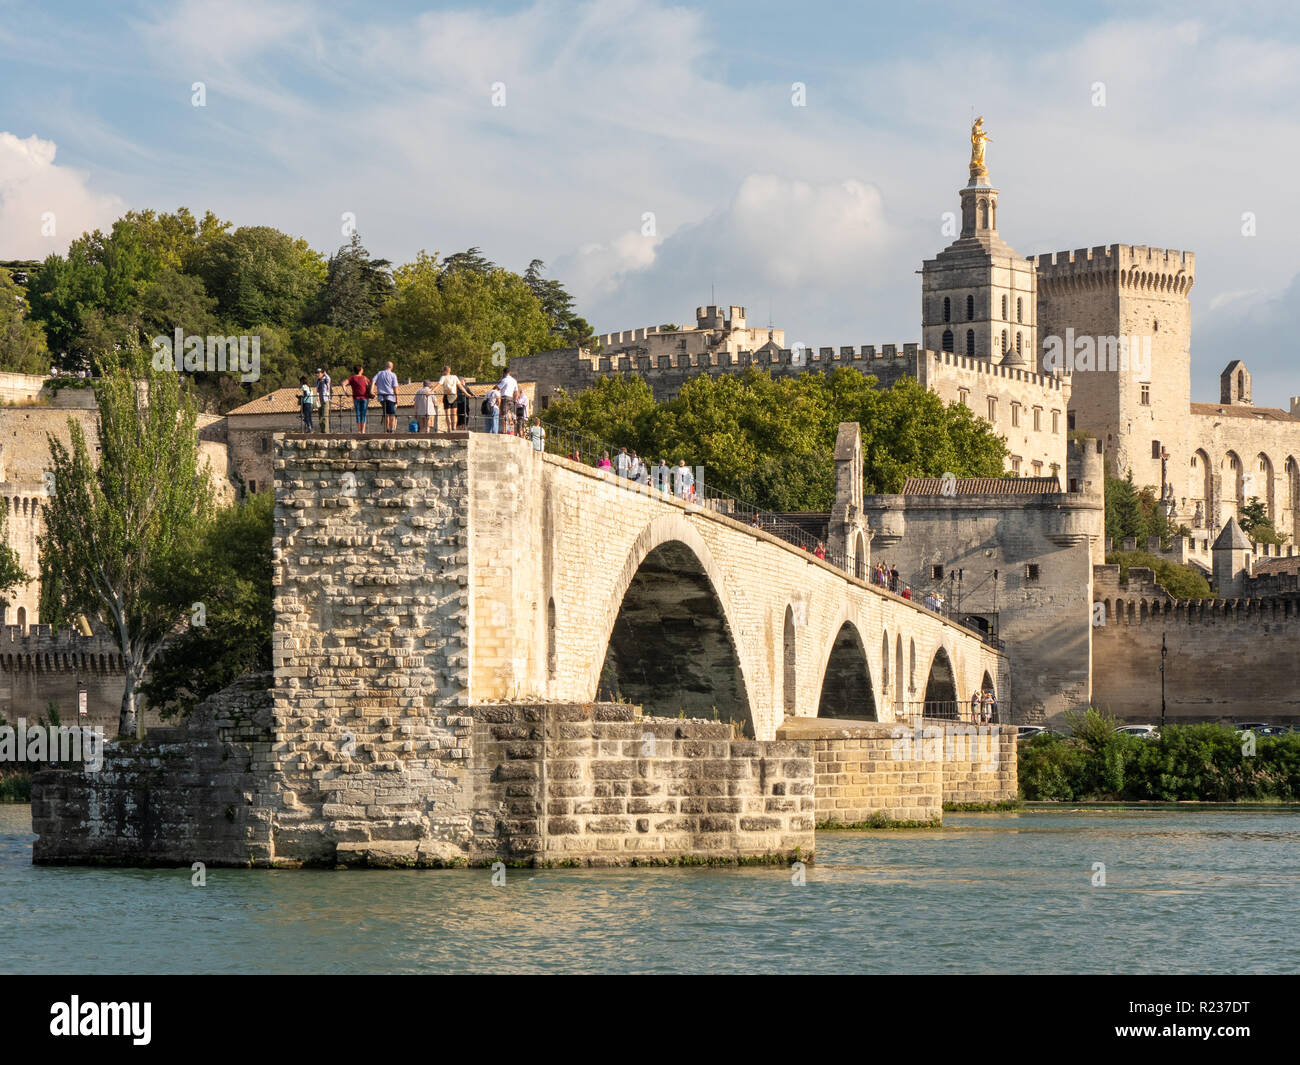 The Avignon bridge and the Papal palace in the city of Avignon, south of France. The bridge and the palace are both built in the medieval time. The ri Stock Photo